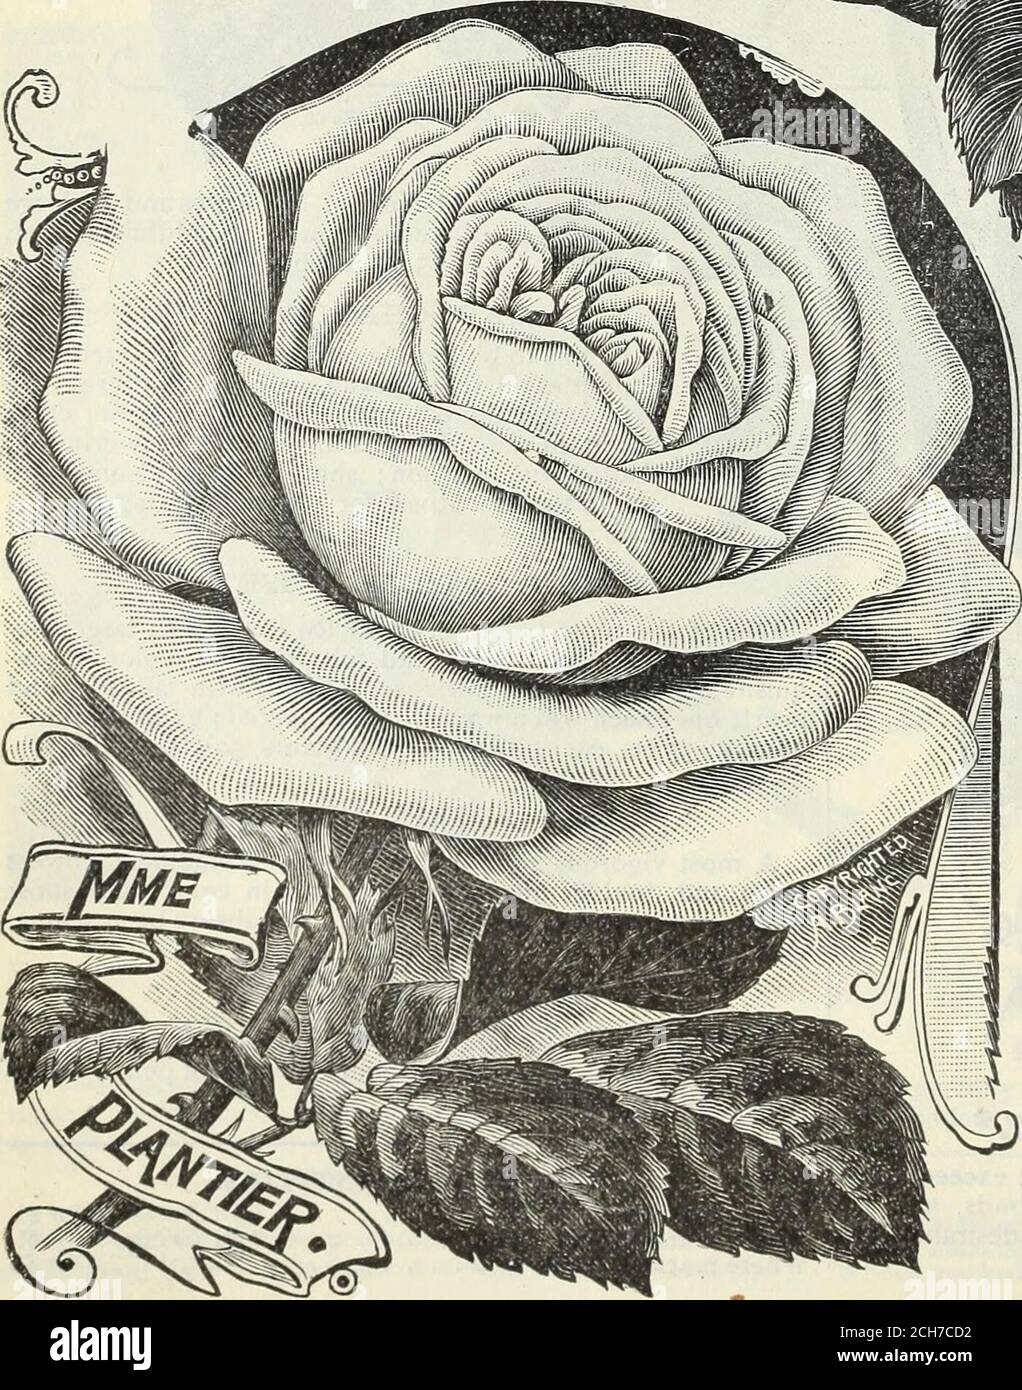 . Our new guide to rose culture : 1898 . th rosy crimson ; petals edged with white ;highly scented ; very desirable. 15 cts. each. MAD. PH. DEWOLFS. Resembles the old Cabbage or One-hun-dred-leaved Rose ; the flowers very full andfragrant; color deep crimson red, veinedwith violet crimson shading to peachy red;exceedingly handsome Rose. 15 cts. each. MAD. VICTOR VERDIER.* Rich, bright cherry red, changing to satinyrose ; large, full and fragrant. 15 cts. each. MADLLE ANNIE WOOD. A magnificent variety; flowers very largefine full form; color brilliant violet crim-son ; exquisite fragrance ; a p Stock Photo